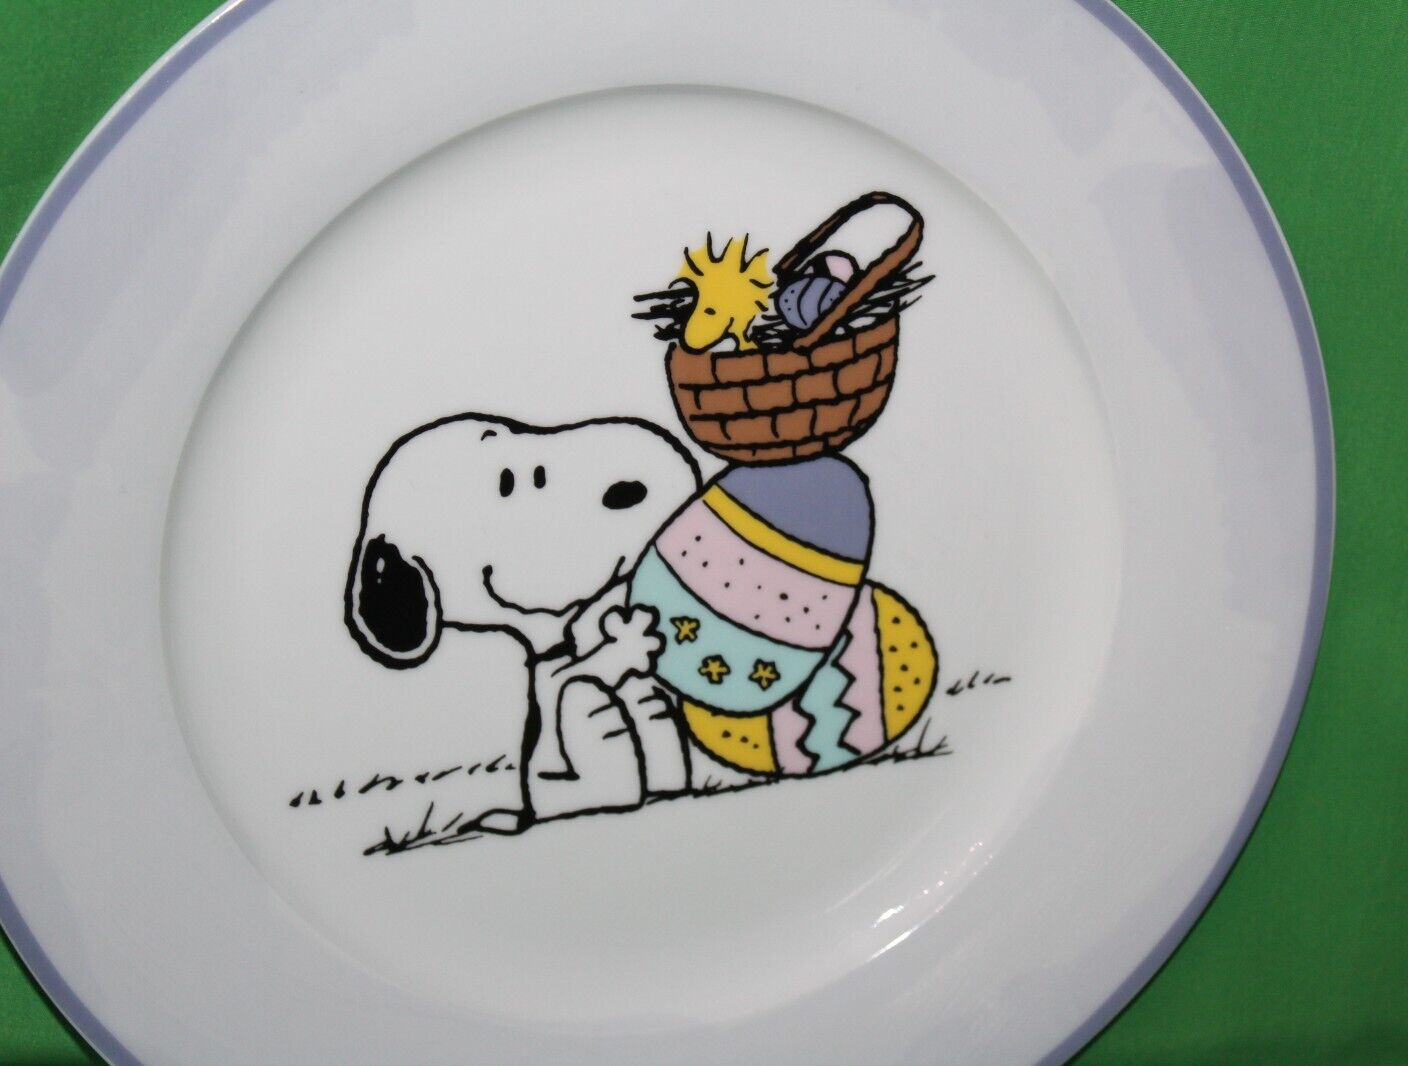 Peanuts Snoopy Dog Woodstock With Easter Egg Basket Ceramic Dinner Plate - $34.64